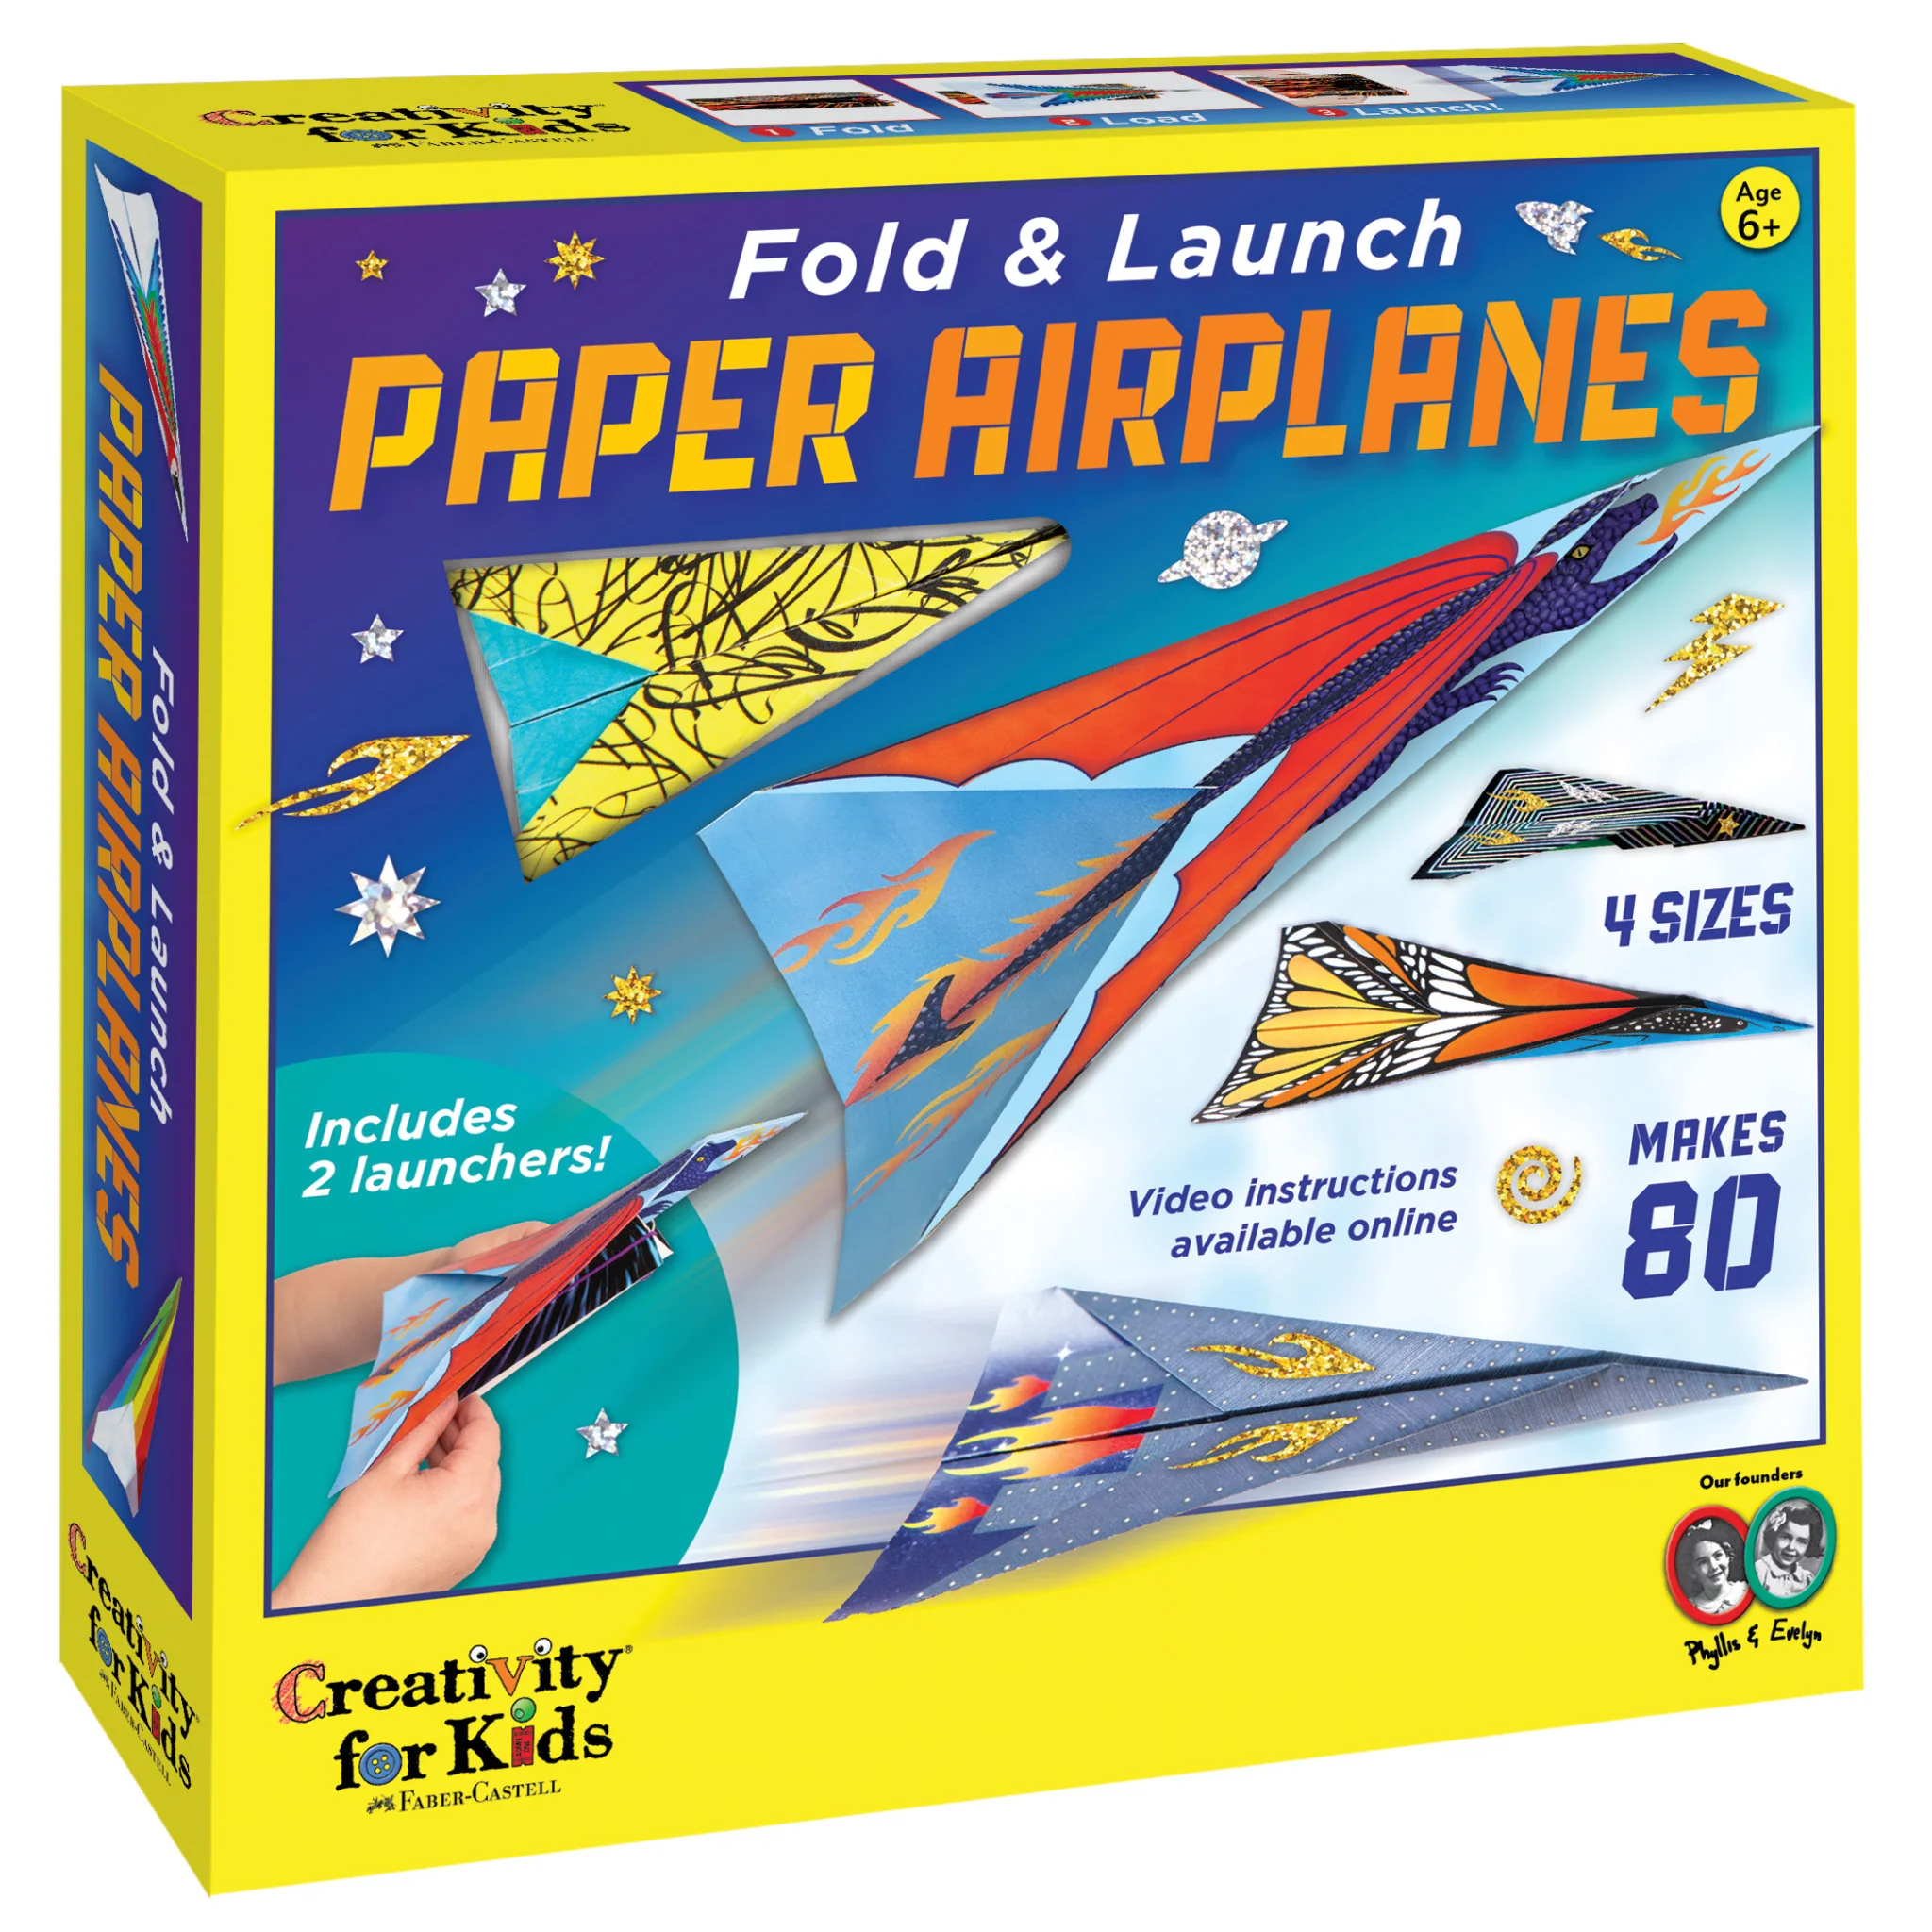 FOLD AND LAUNCH PAPER AIRPLANES